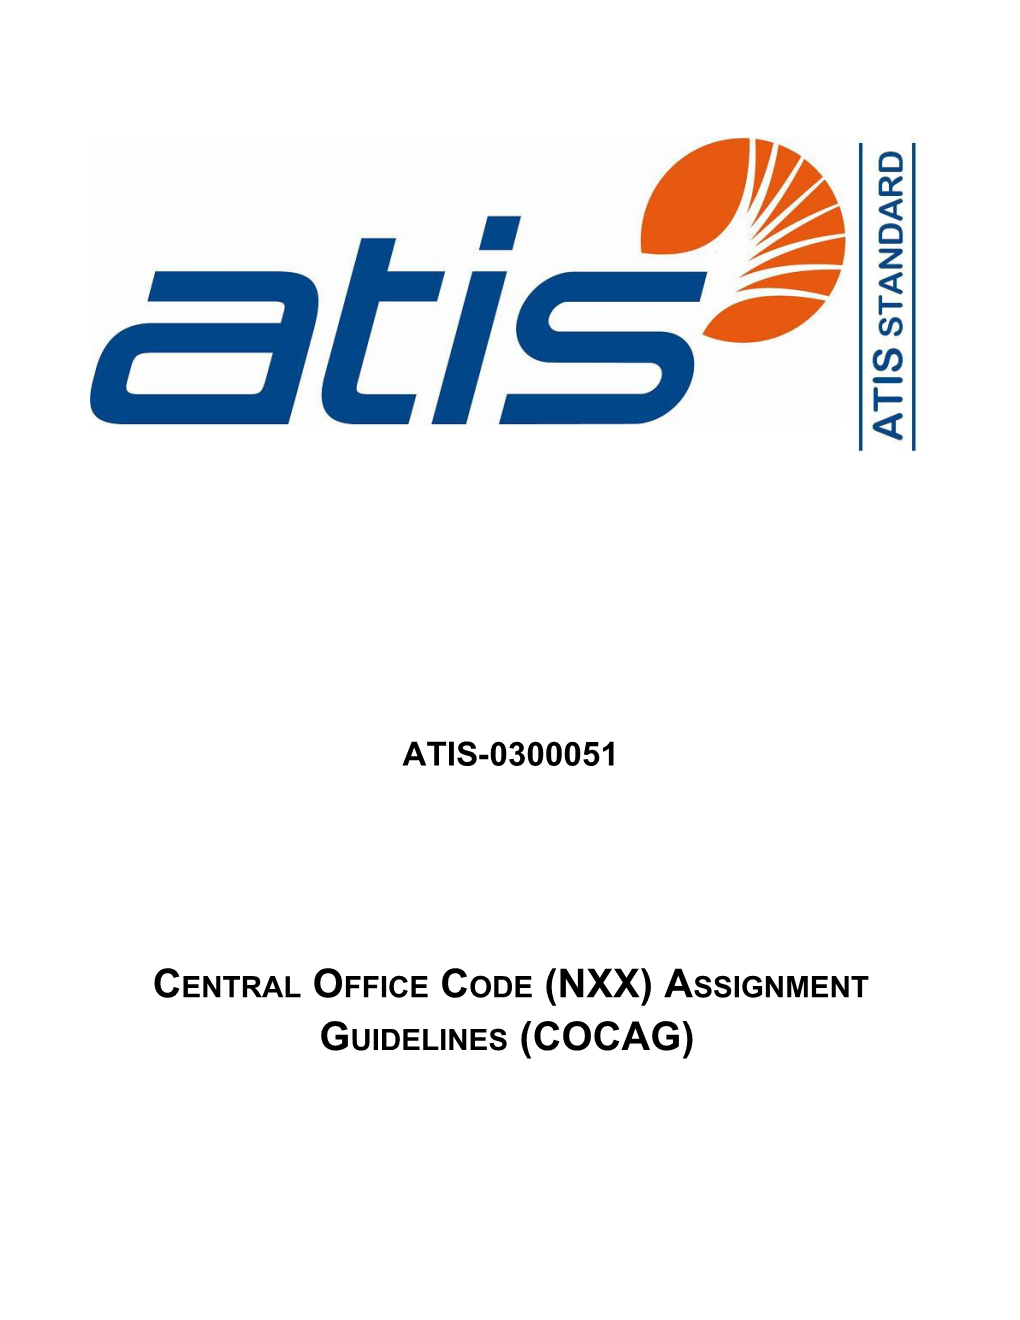 Central Office Code (NXX) Assignment Guidelines (COCAG)